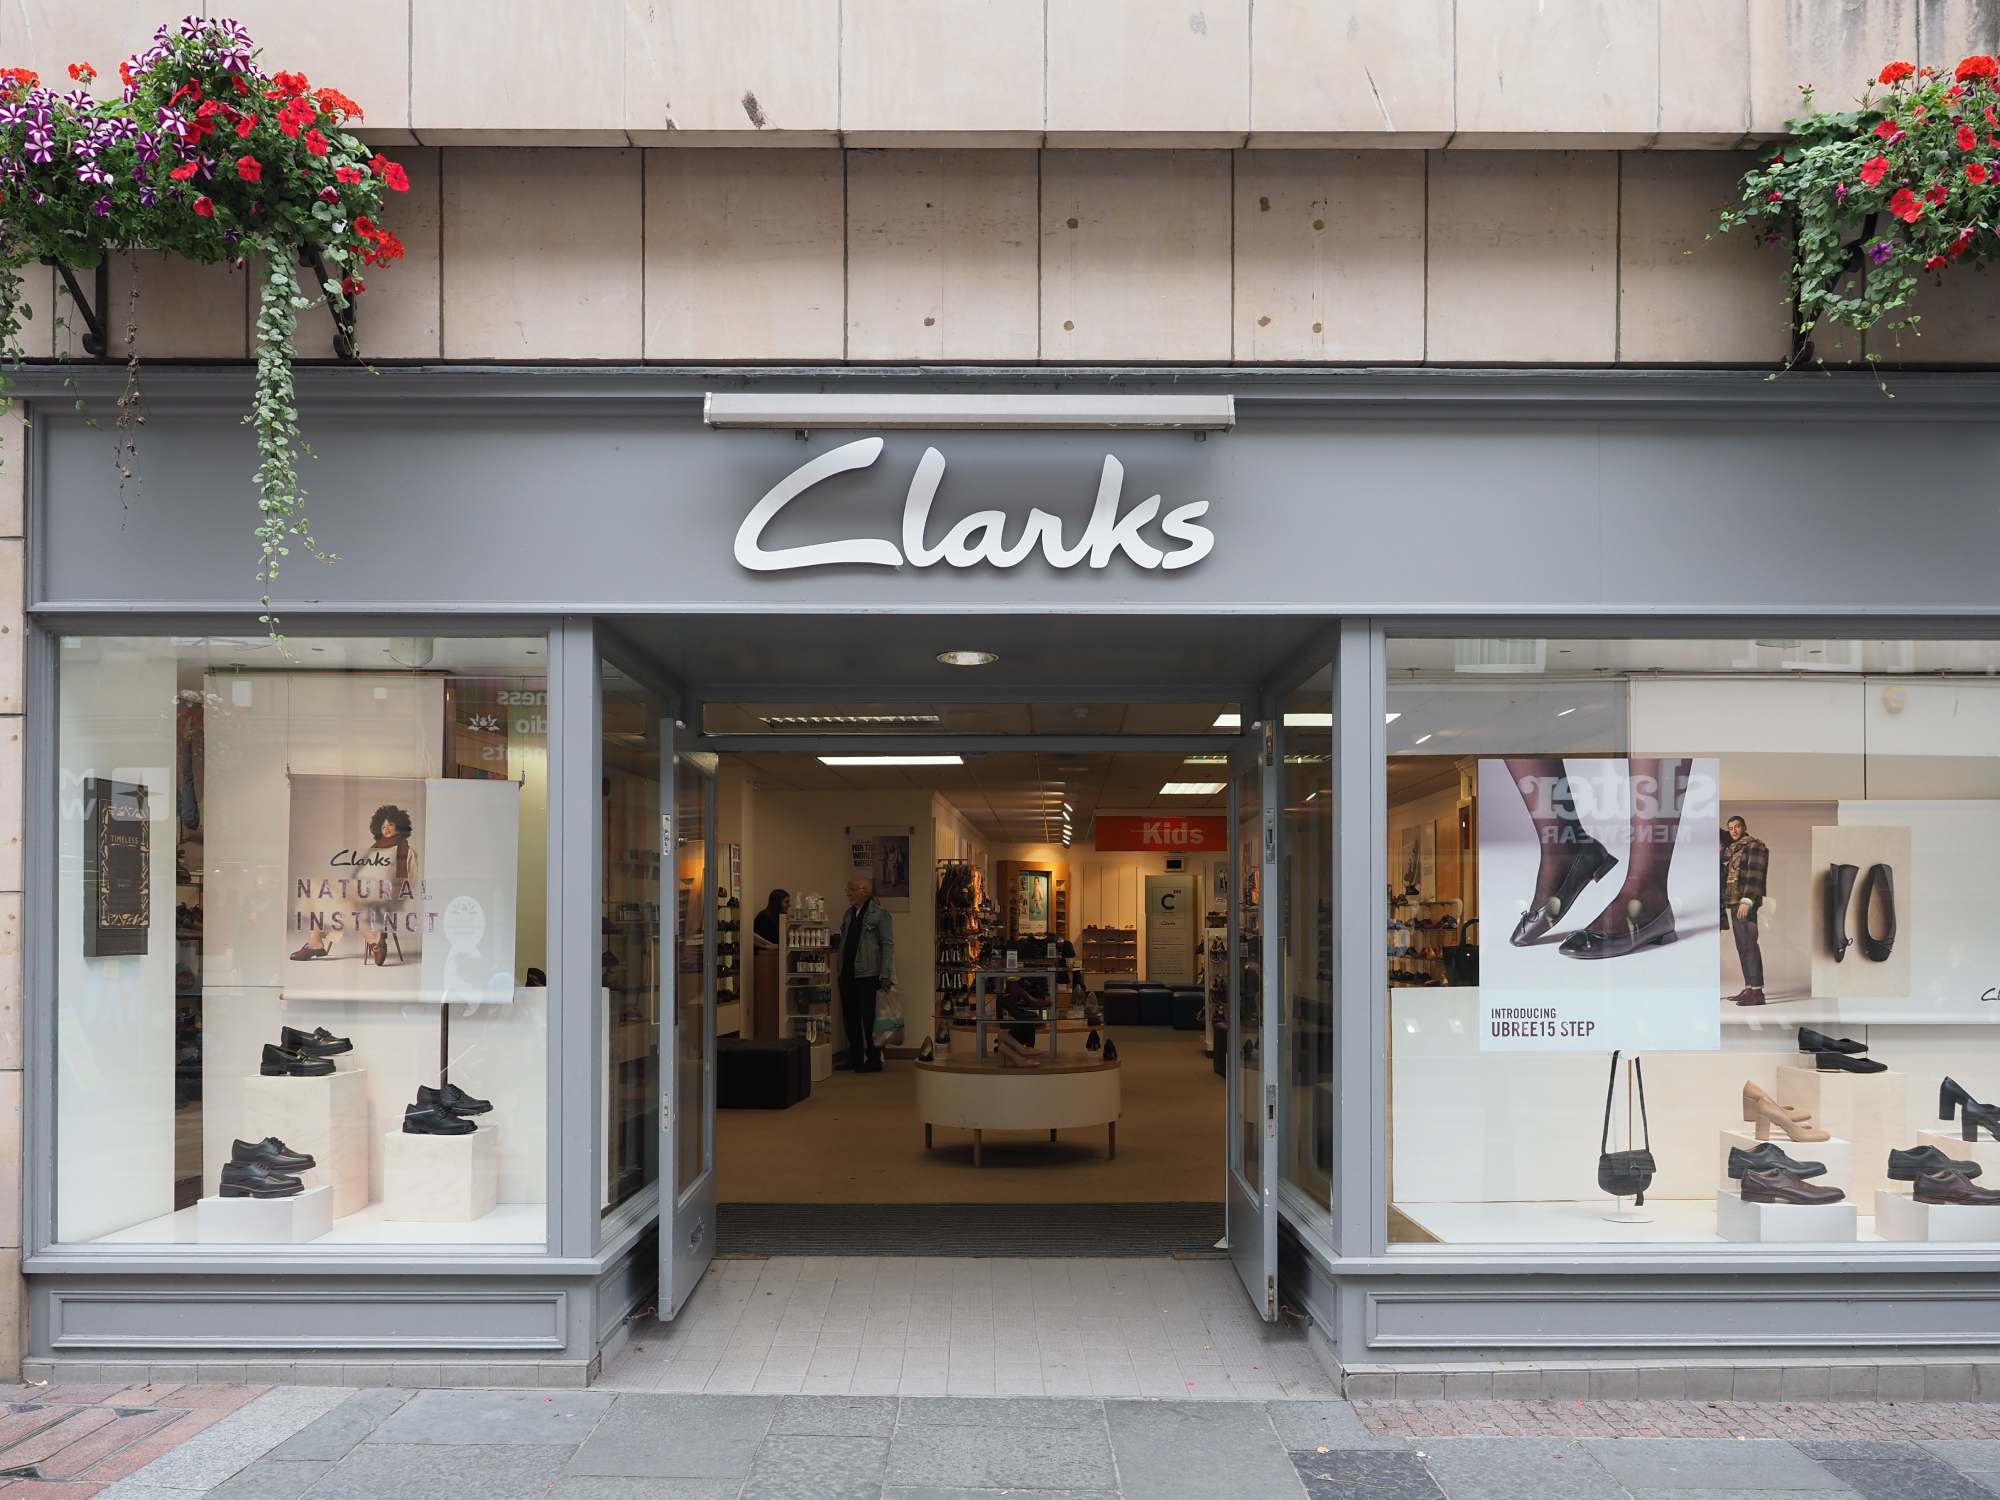 Clarks shoe store in Inverness